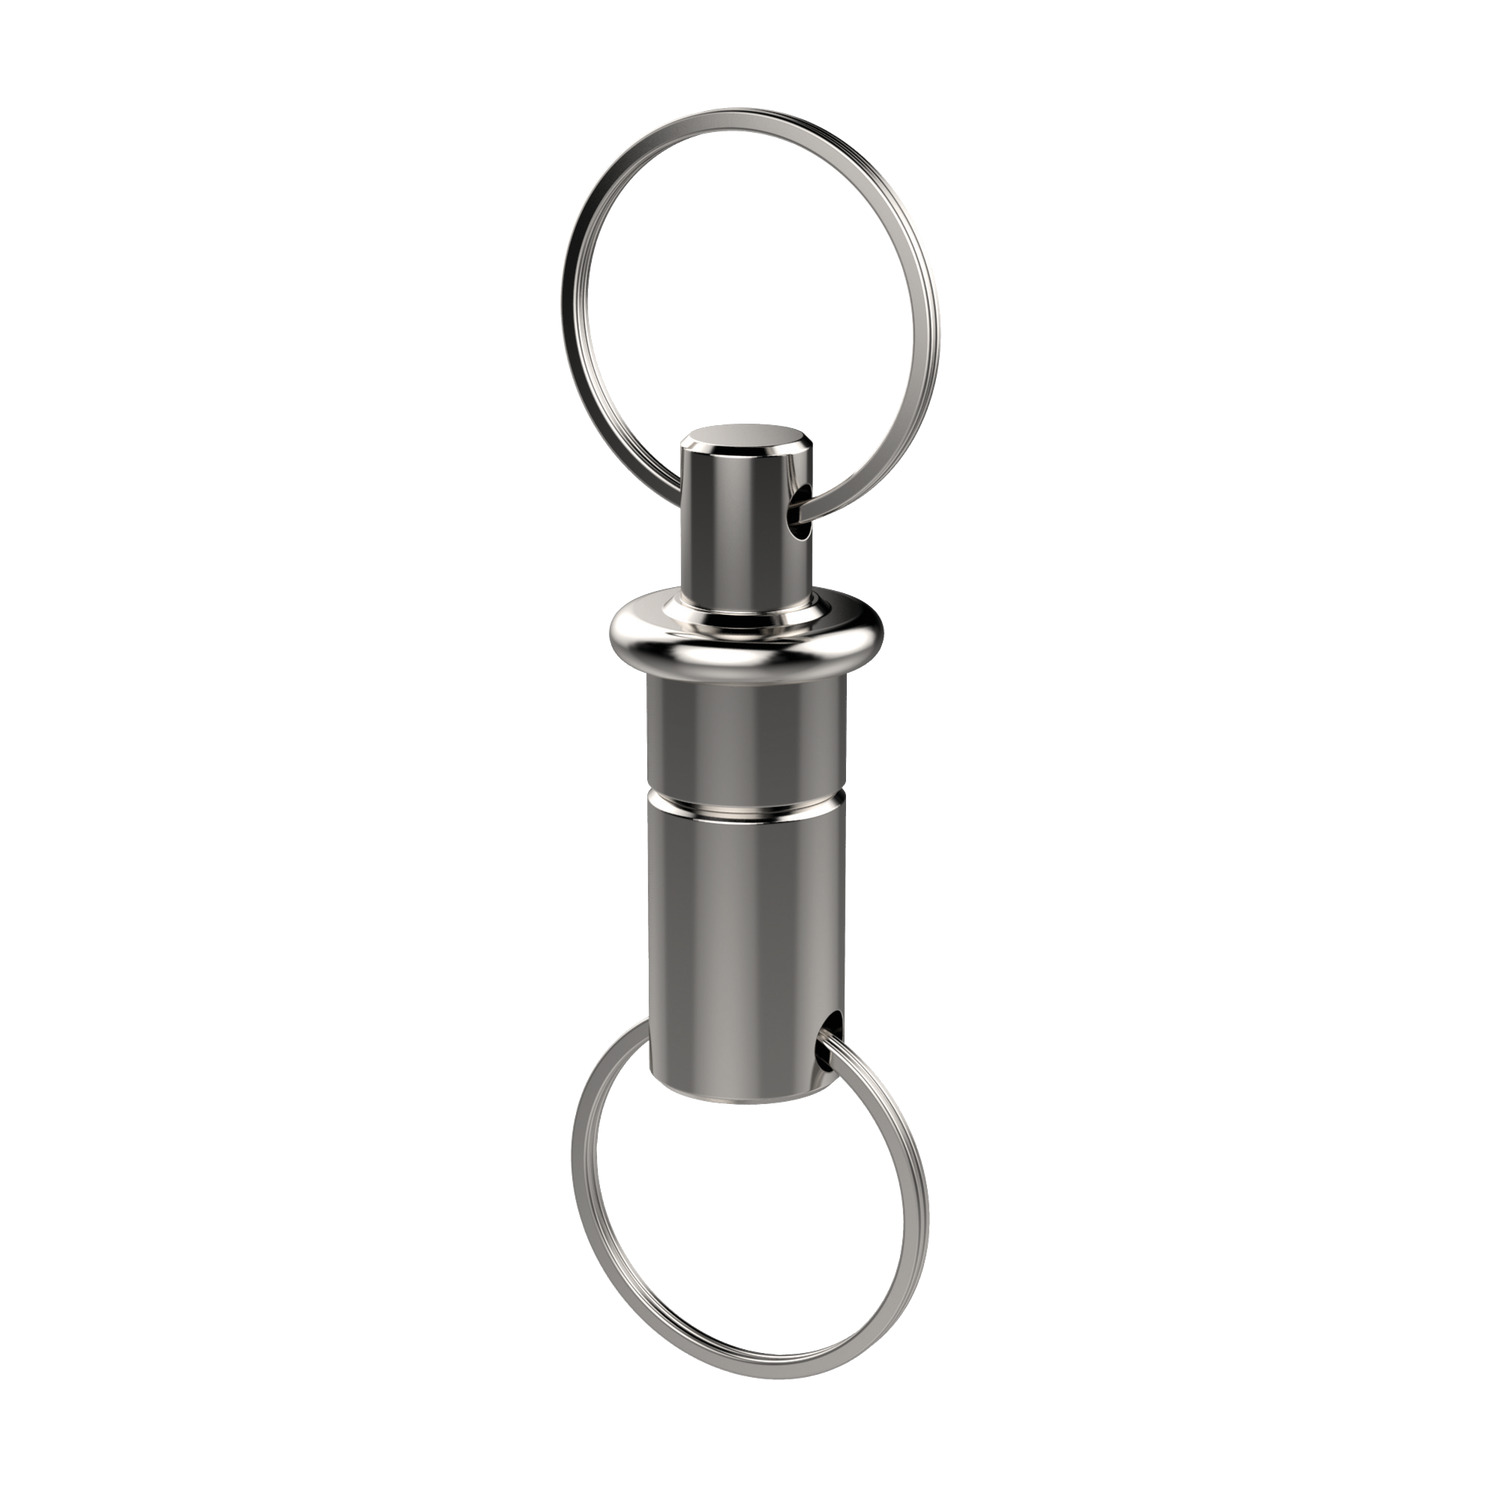 Ball Lock Pins - Single Acting - Key Ring Self locking, single acting ball lock pin with key rings. Made from stainless steel. These can be really useful to secure tools to work locations that are elevated - to stop tools from falling and causing accidents. Also for use with our lanyards and retaining cables.